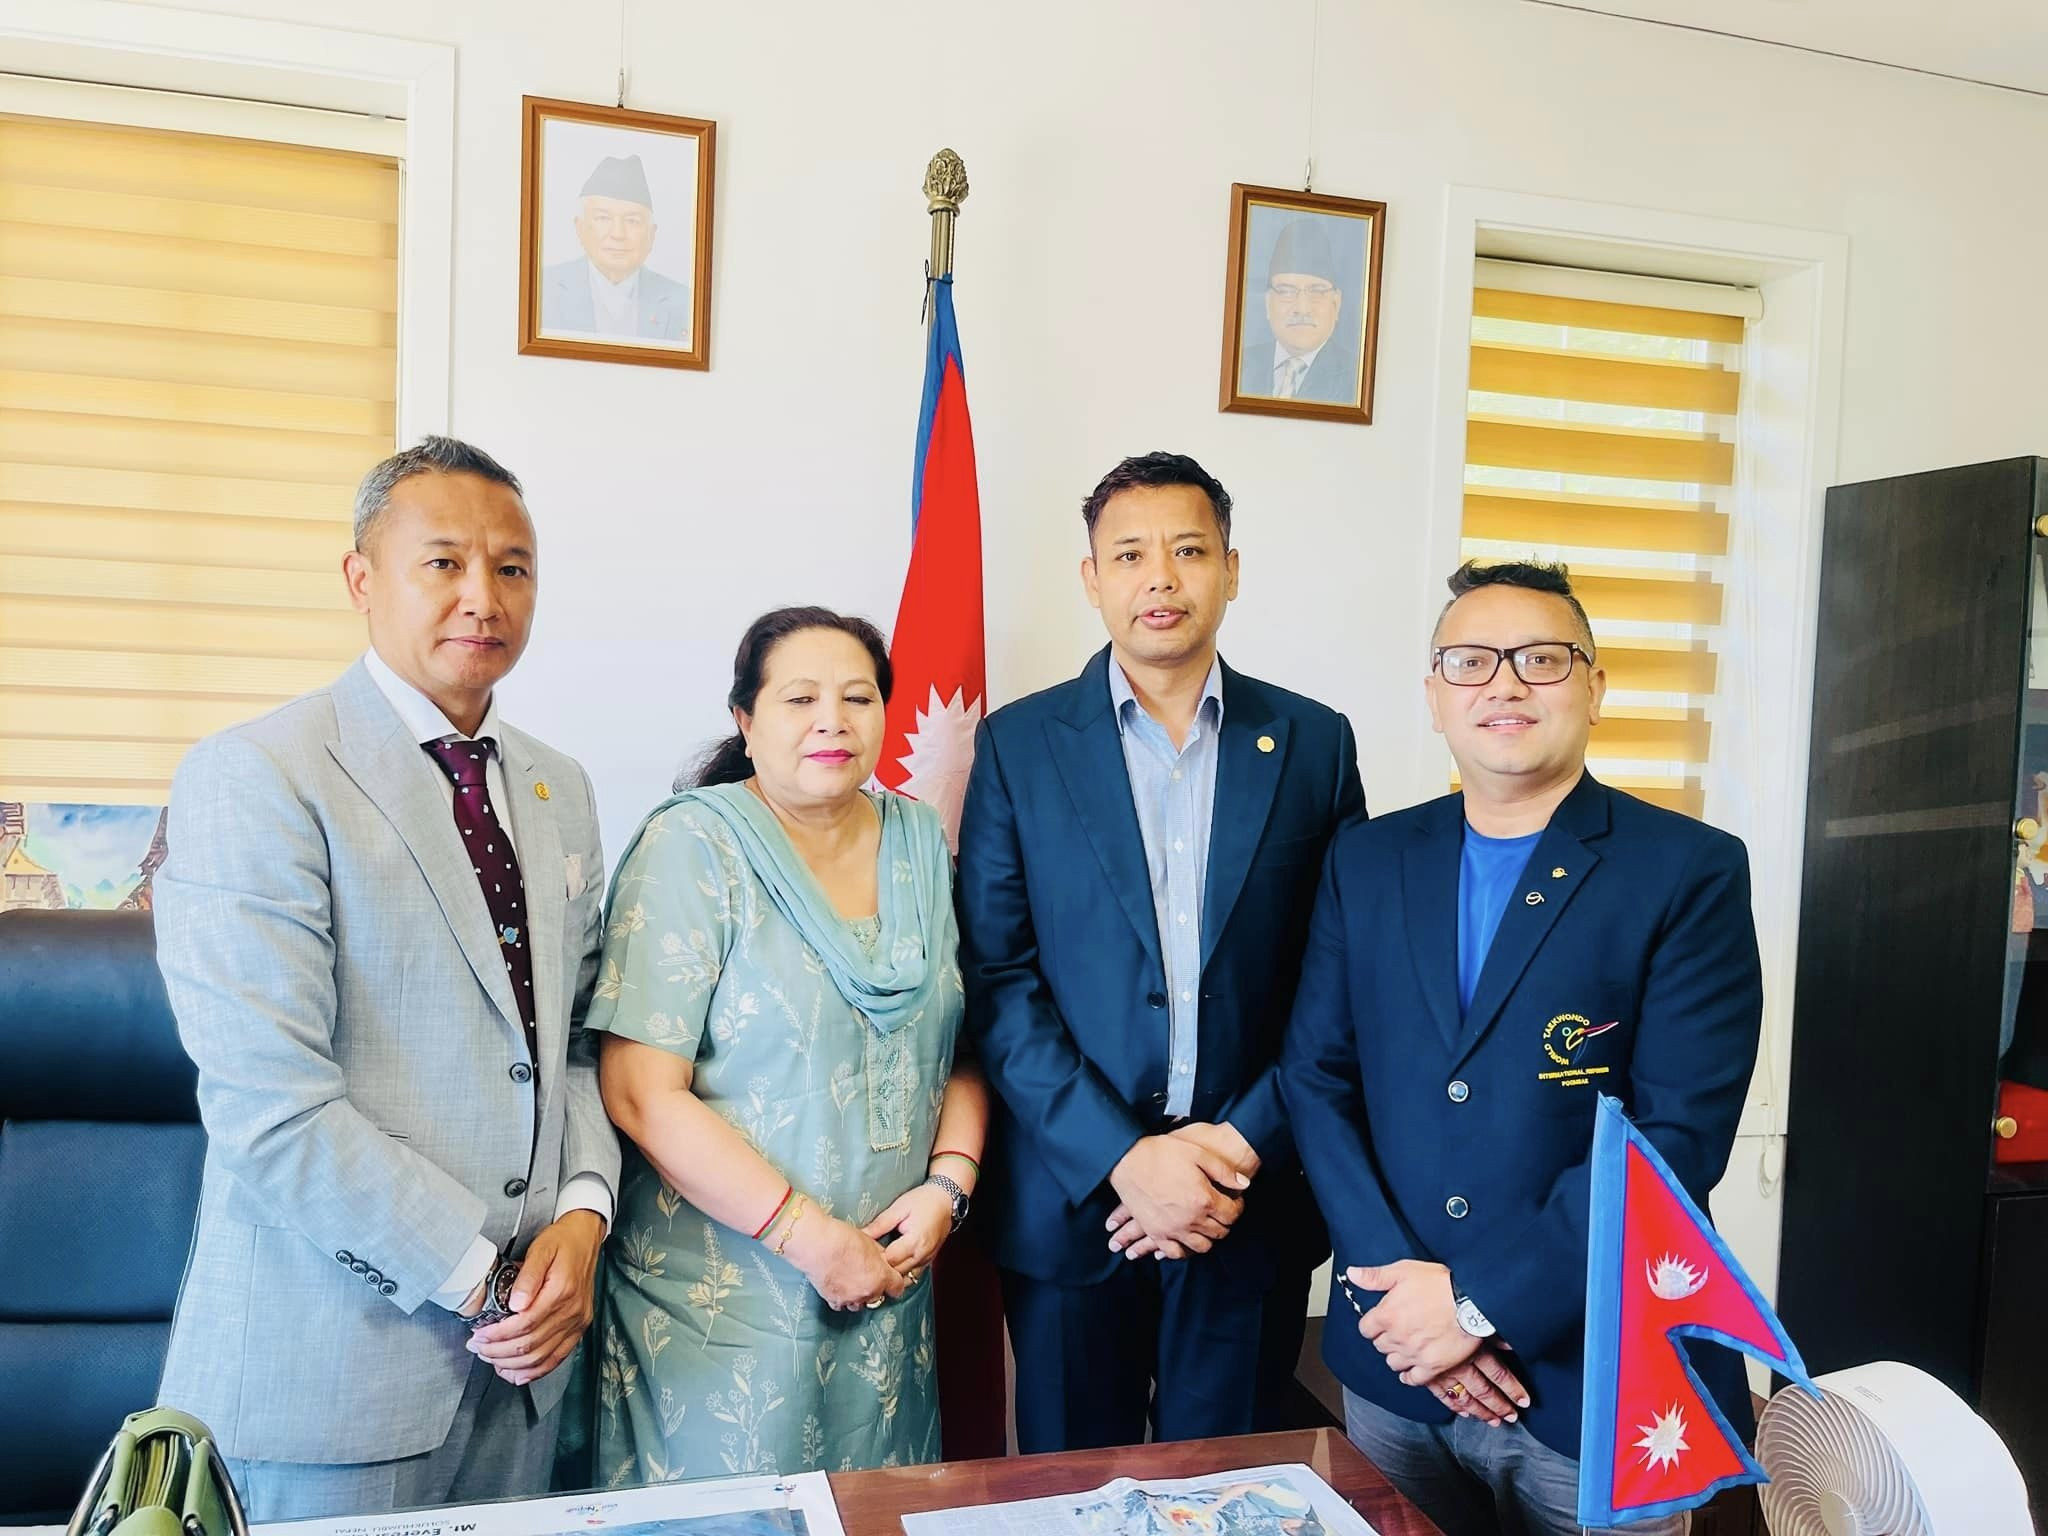 Nepalese taekwondo referees recognised at Embassy in South Korea